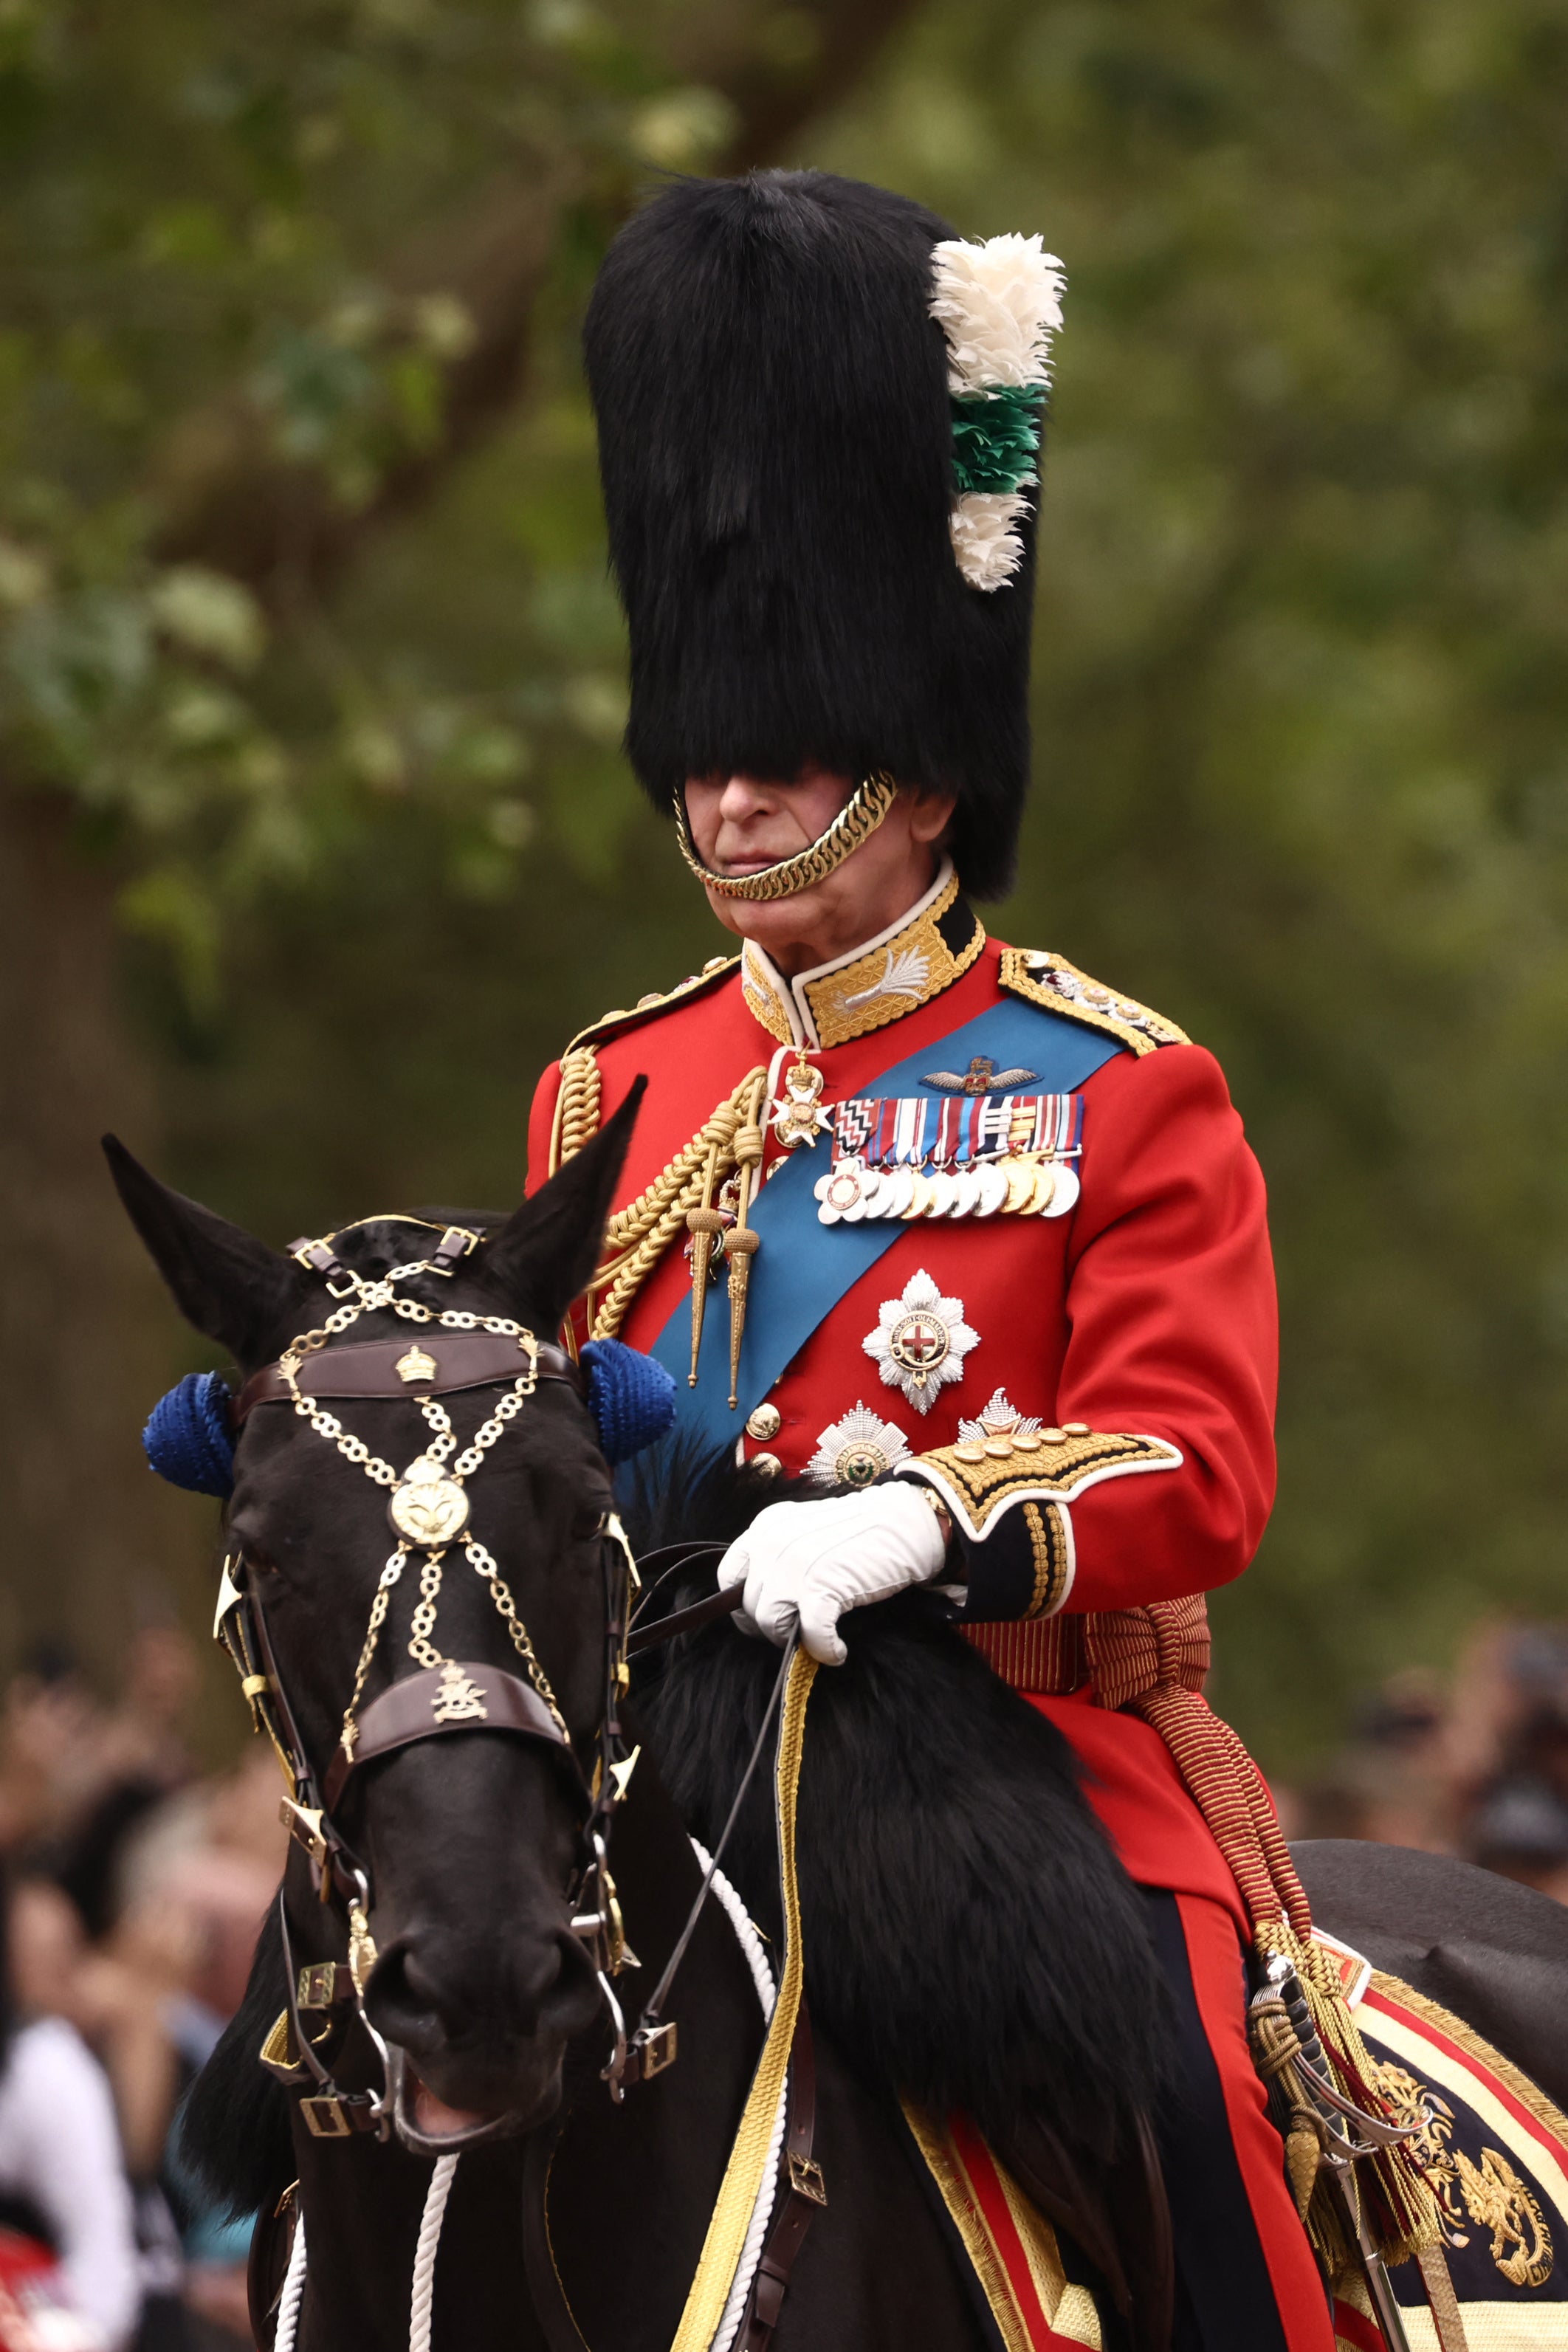 The King appeared on horseback at last year’s Trooping the Colour